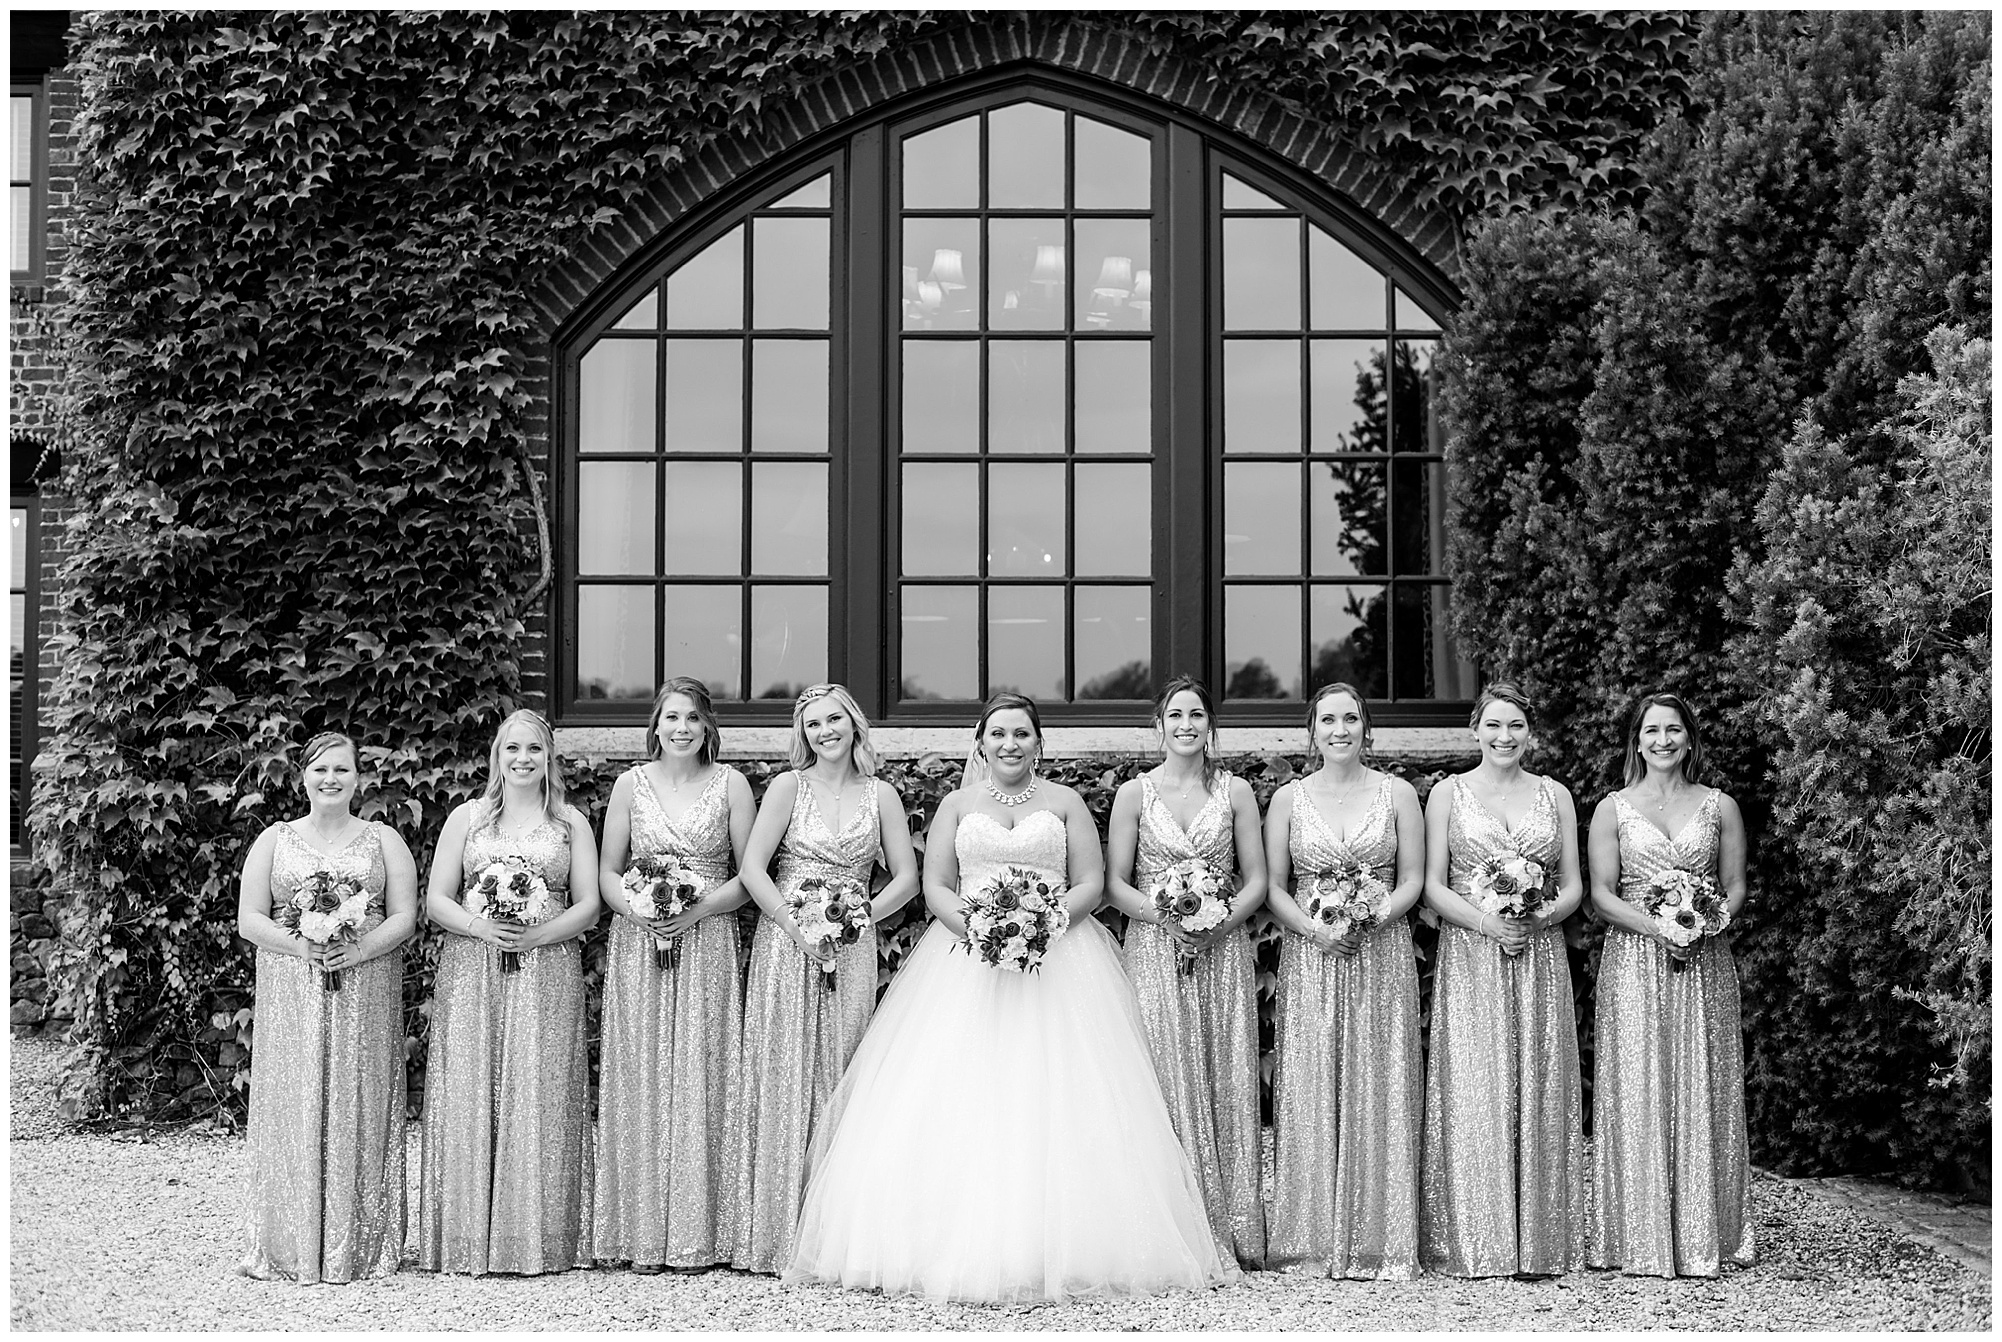 bride and bridesmaids wedding party photo at dover hall richmond rva in september fall